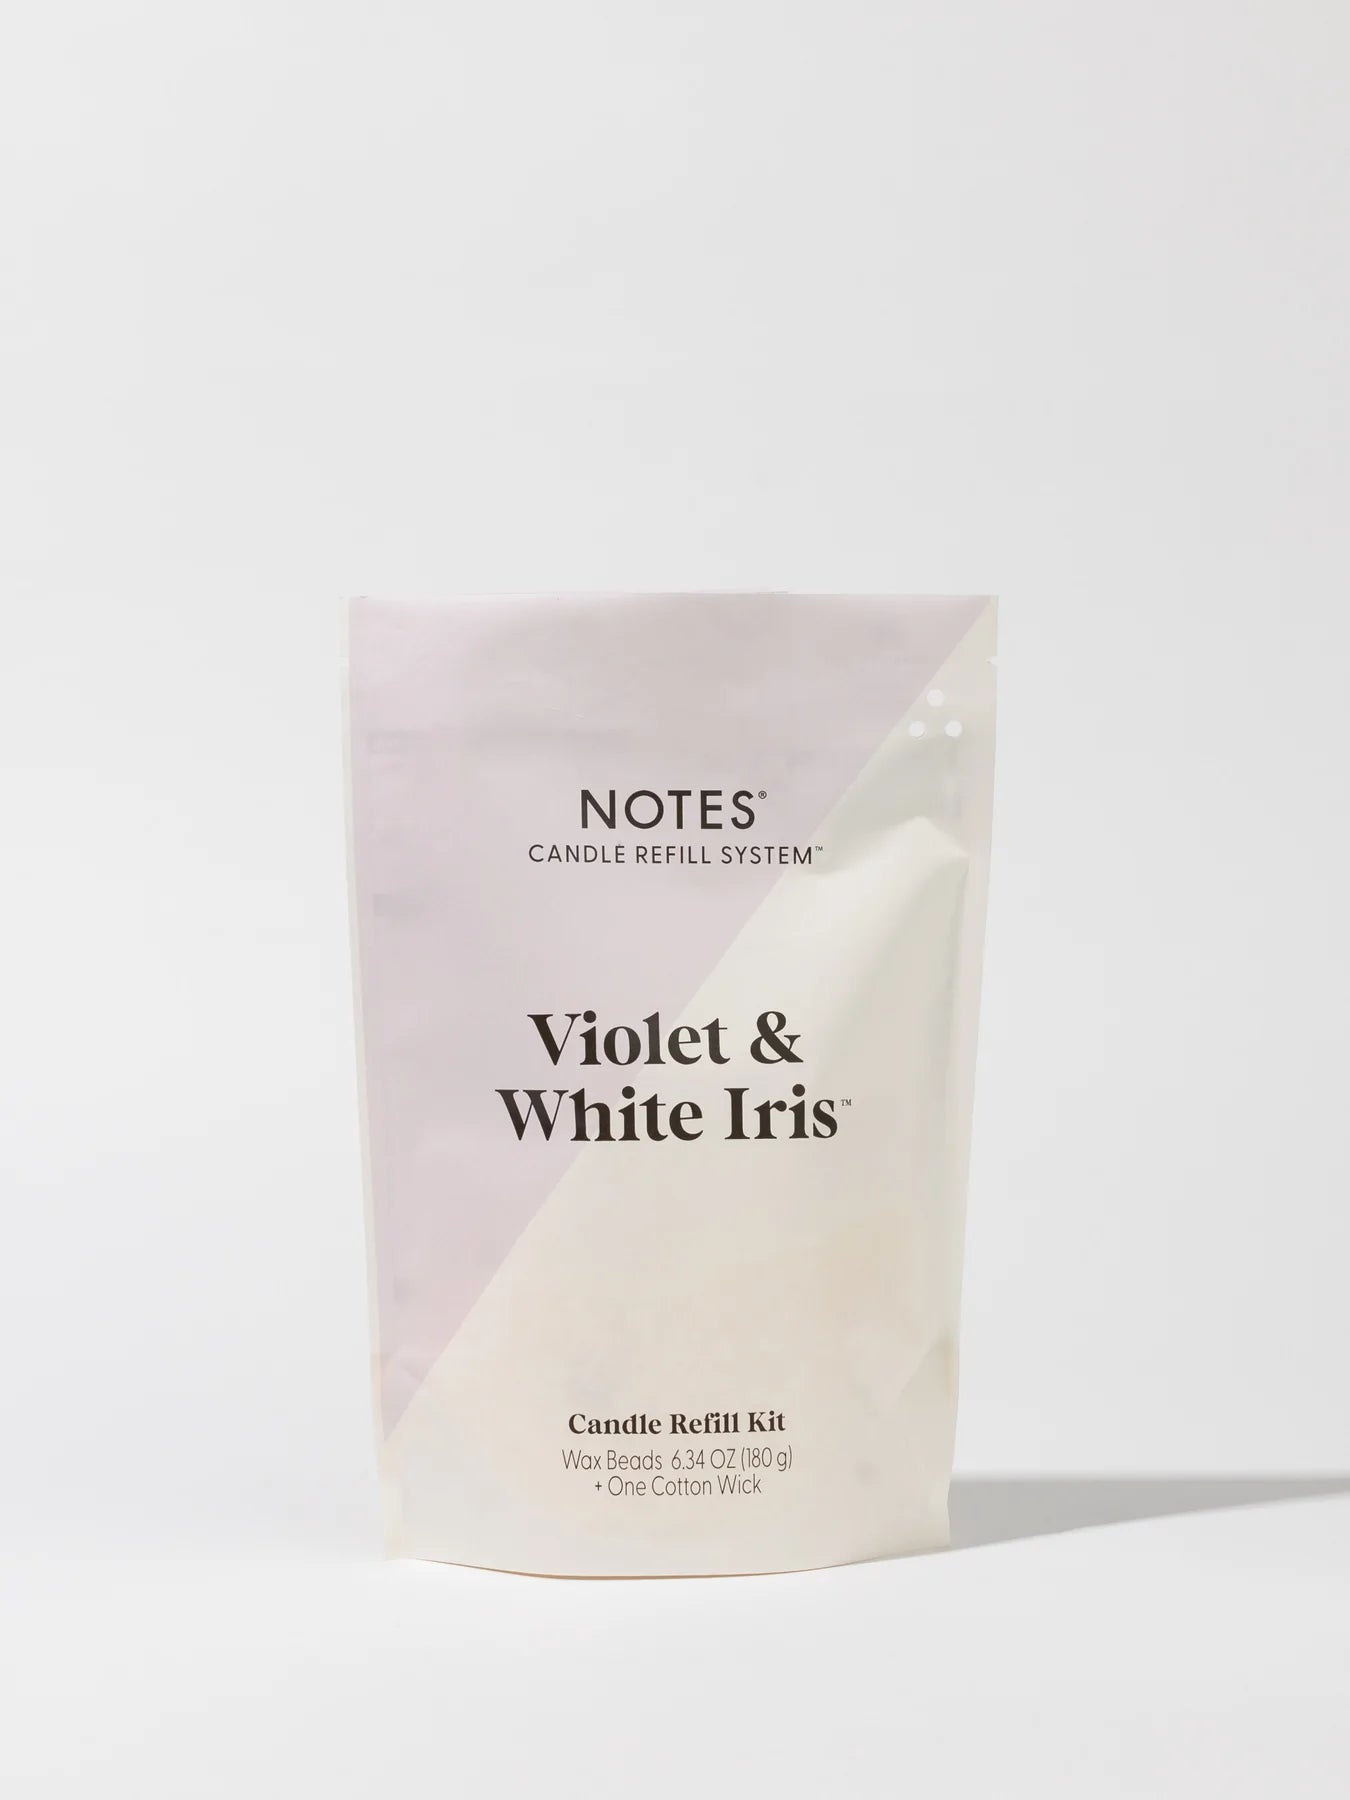 Notes Candle Refill Kit